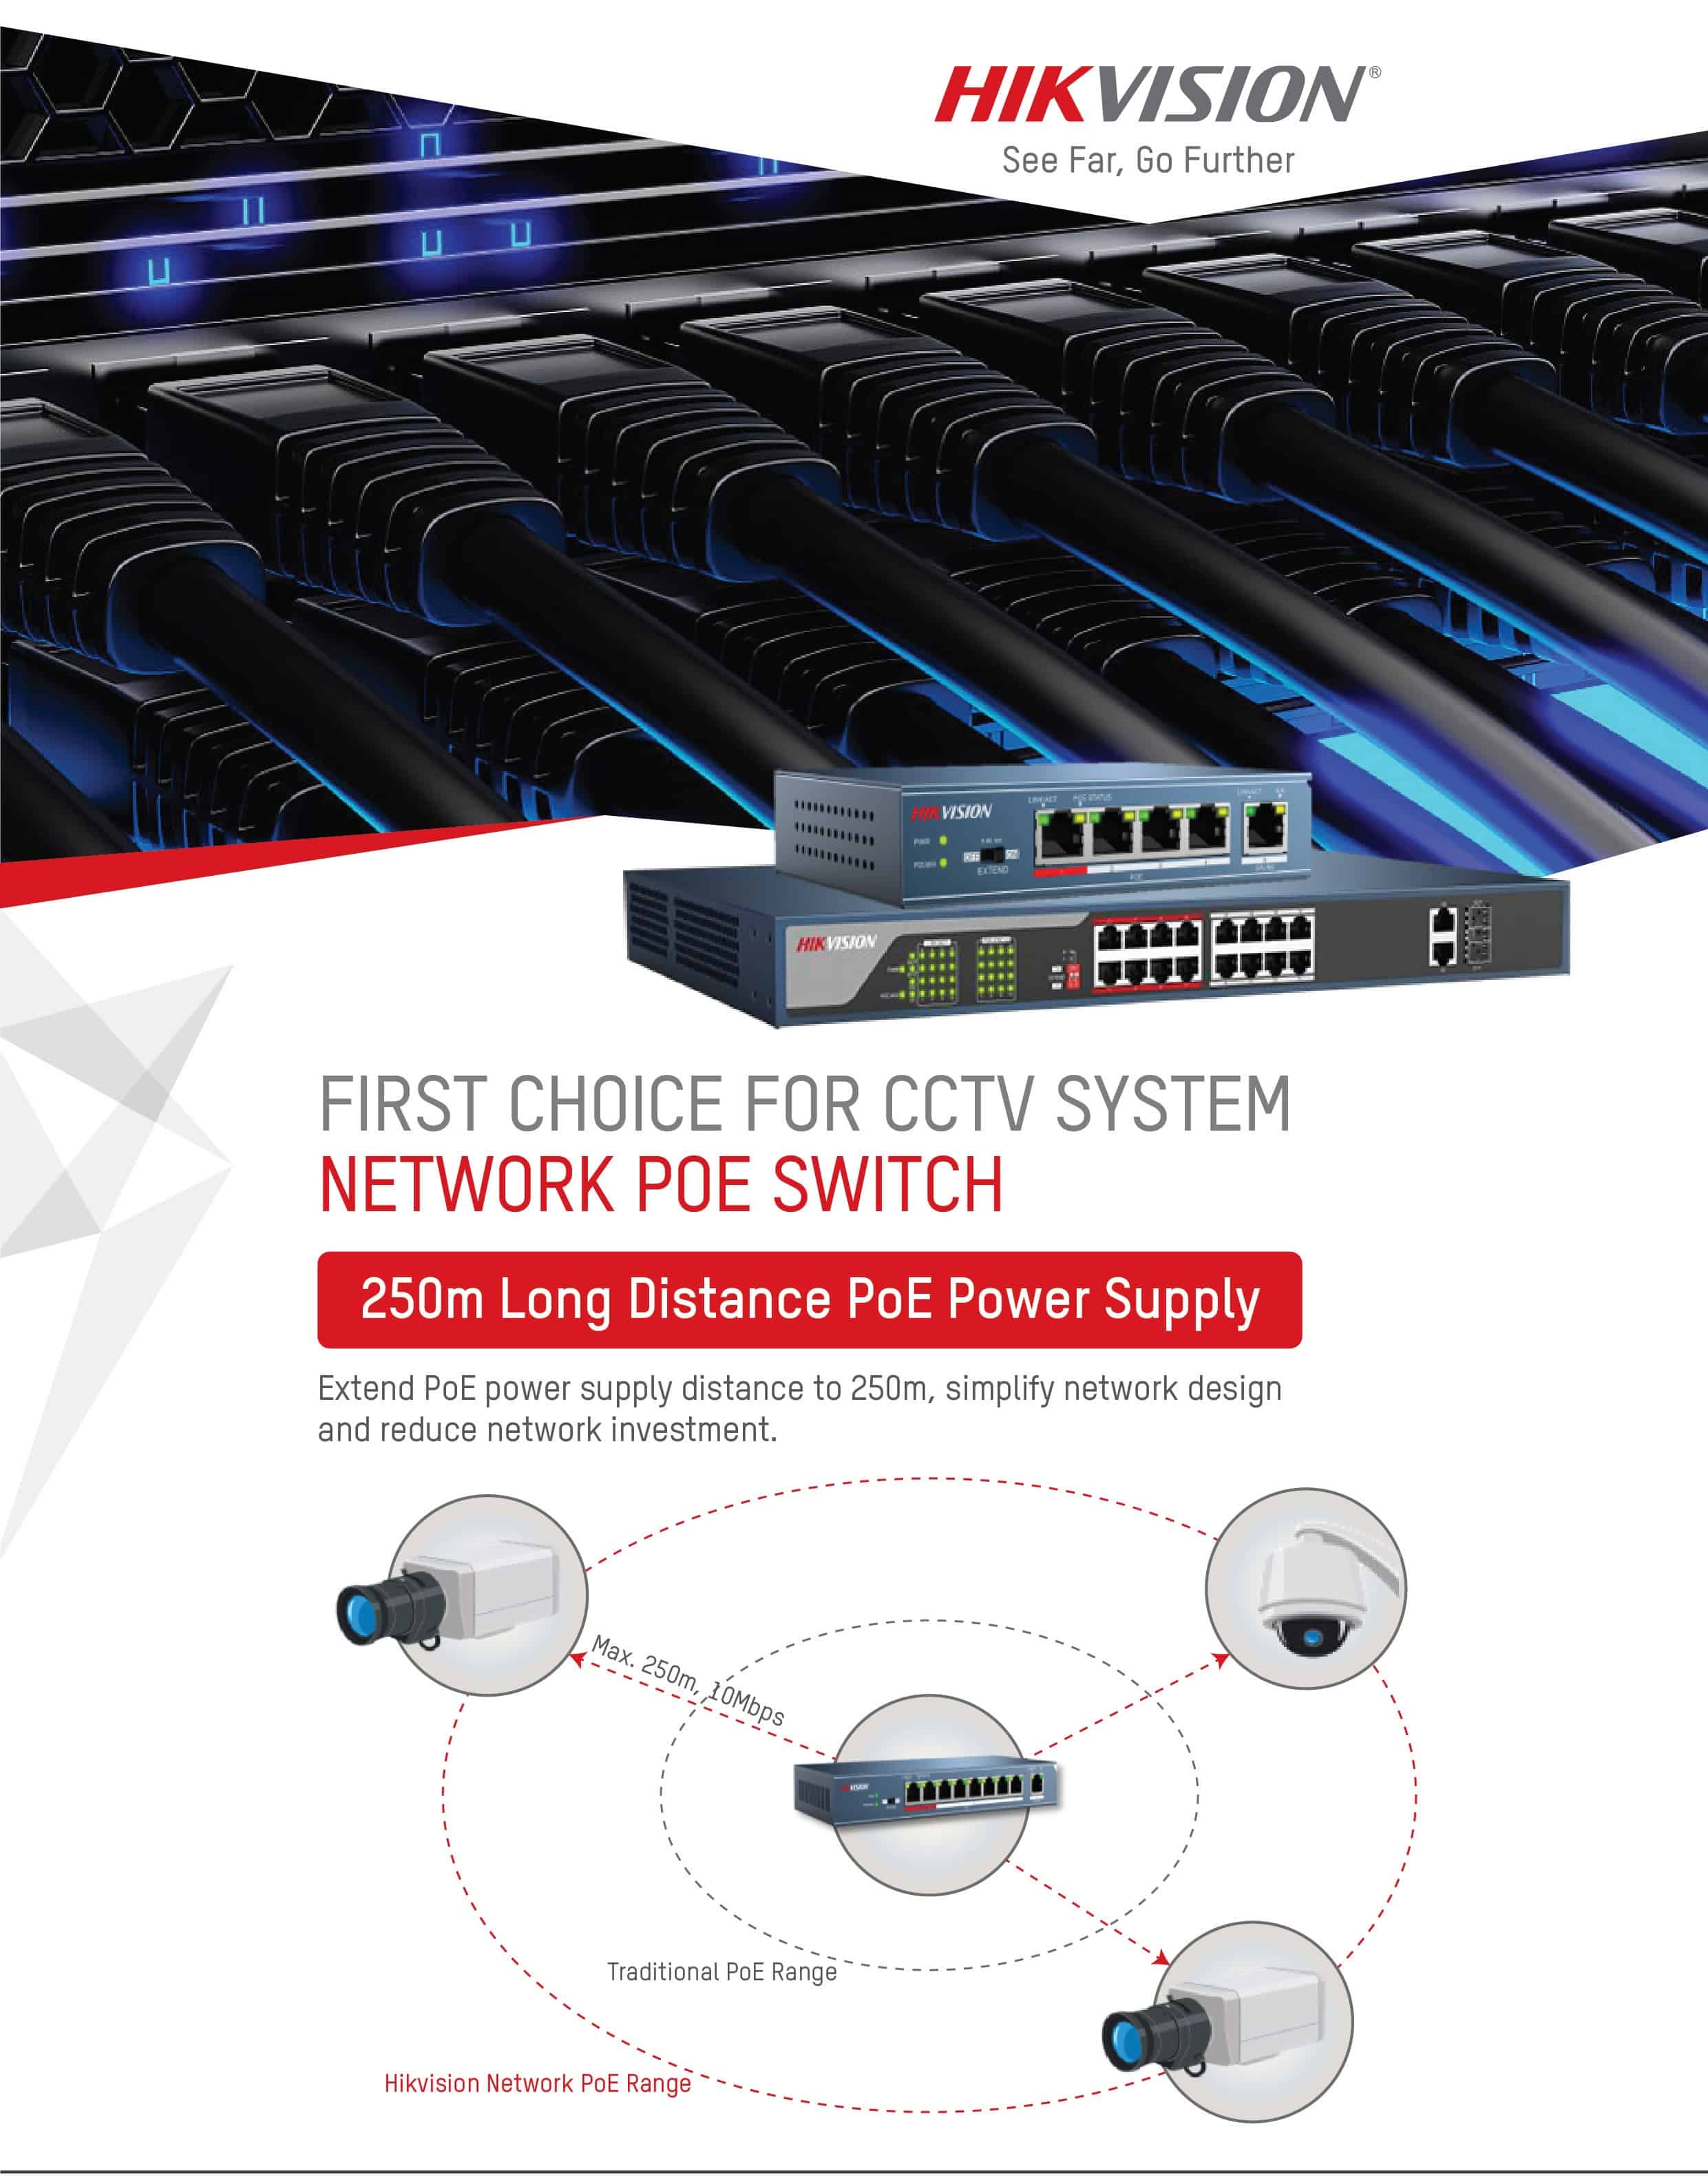 Hikvision CCTV System Network POE Switch